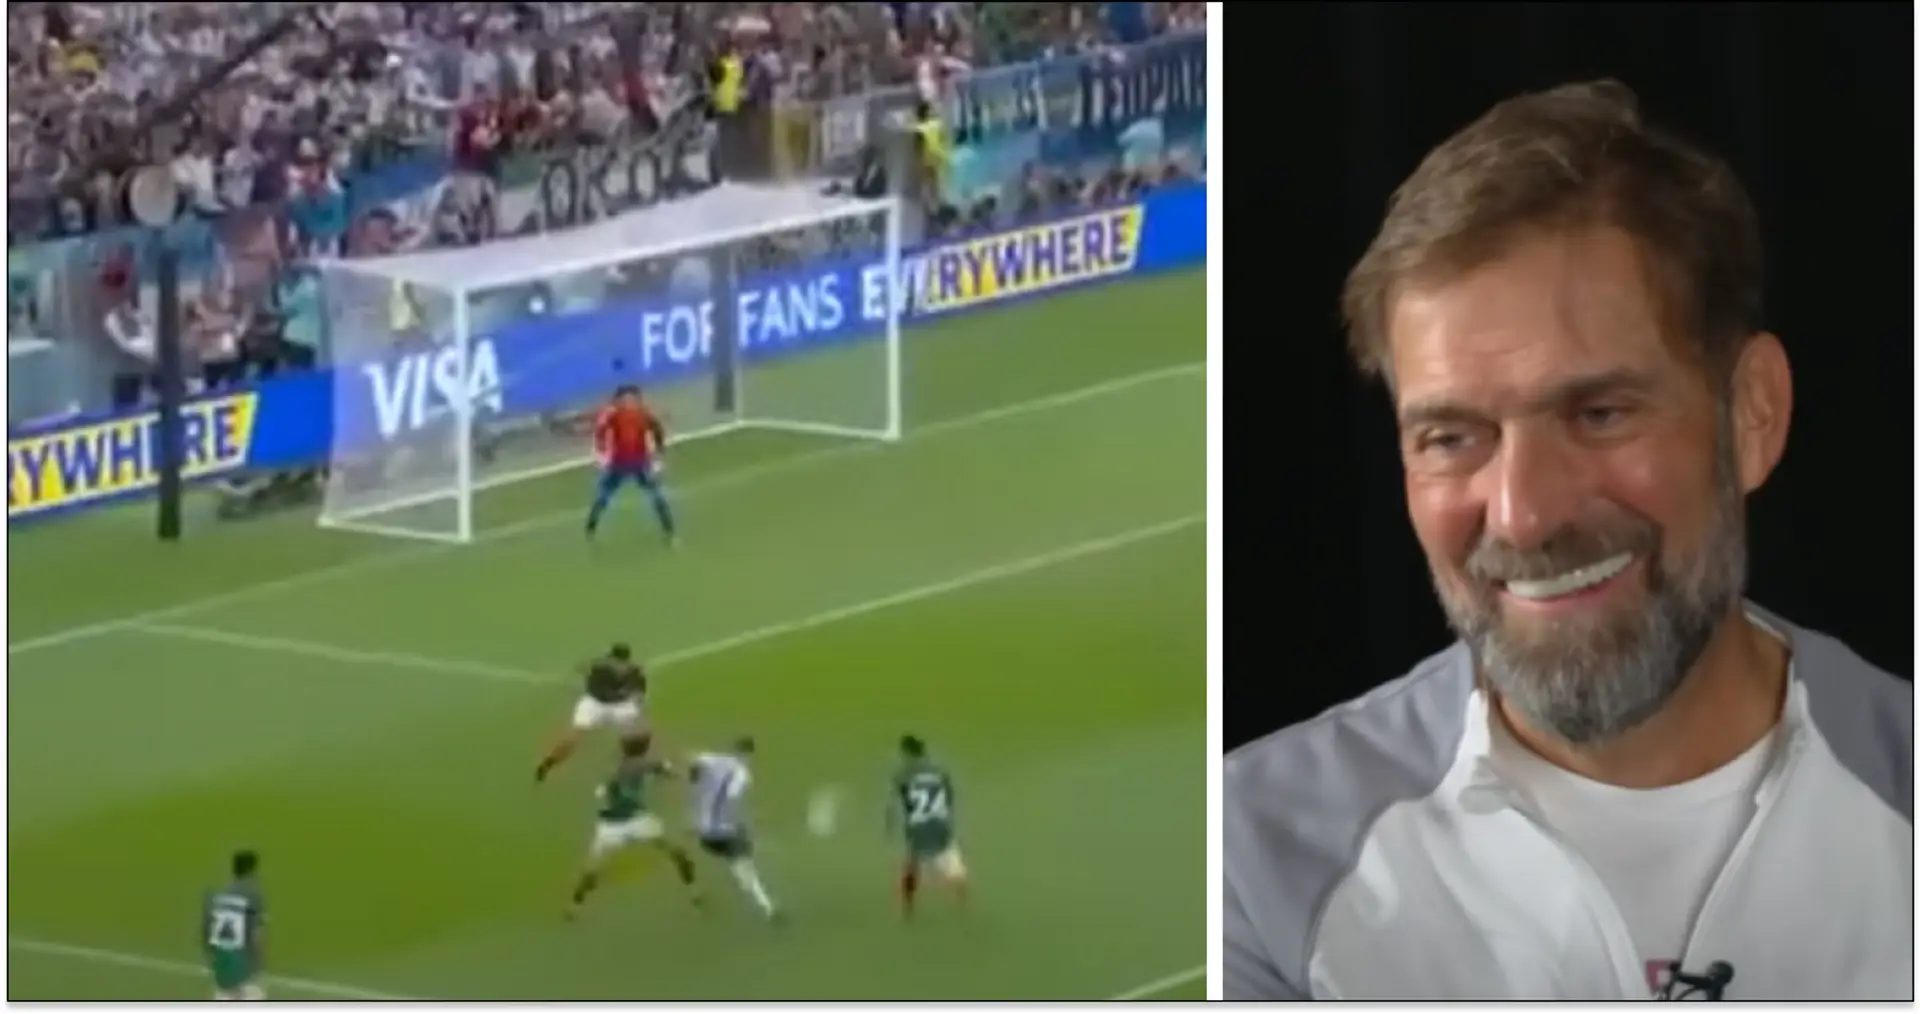 'We need him at Liverpool': Reds-linked midfielder scores insane goal at World Cup